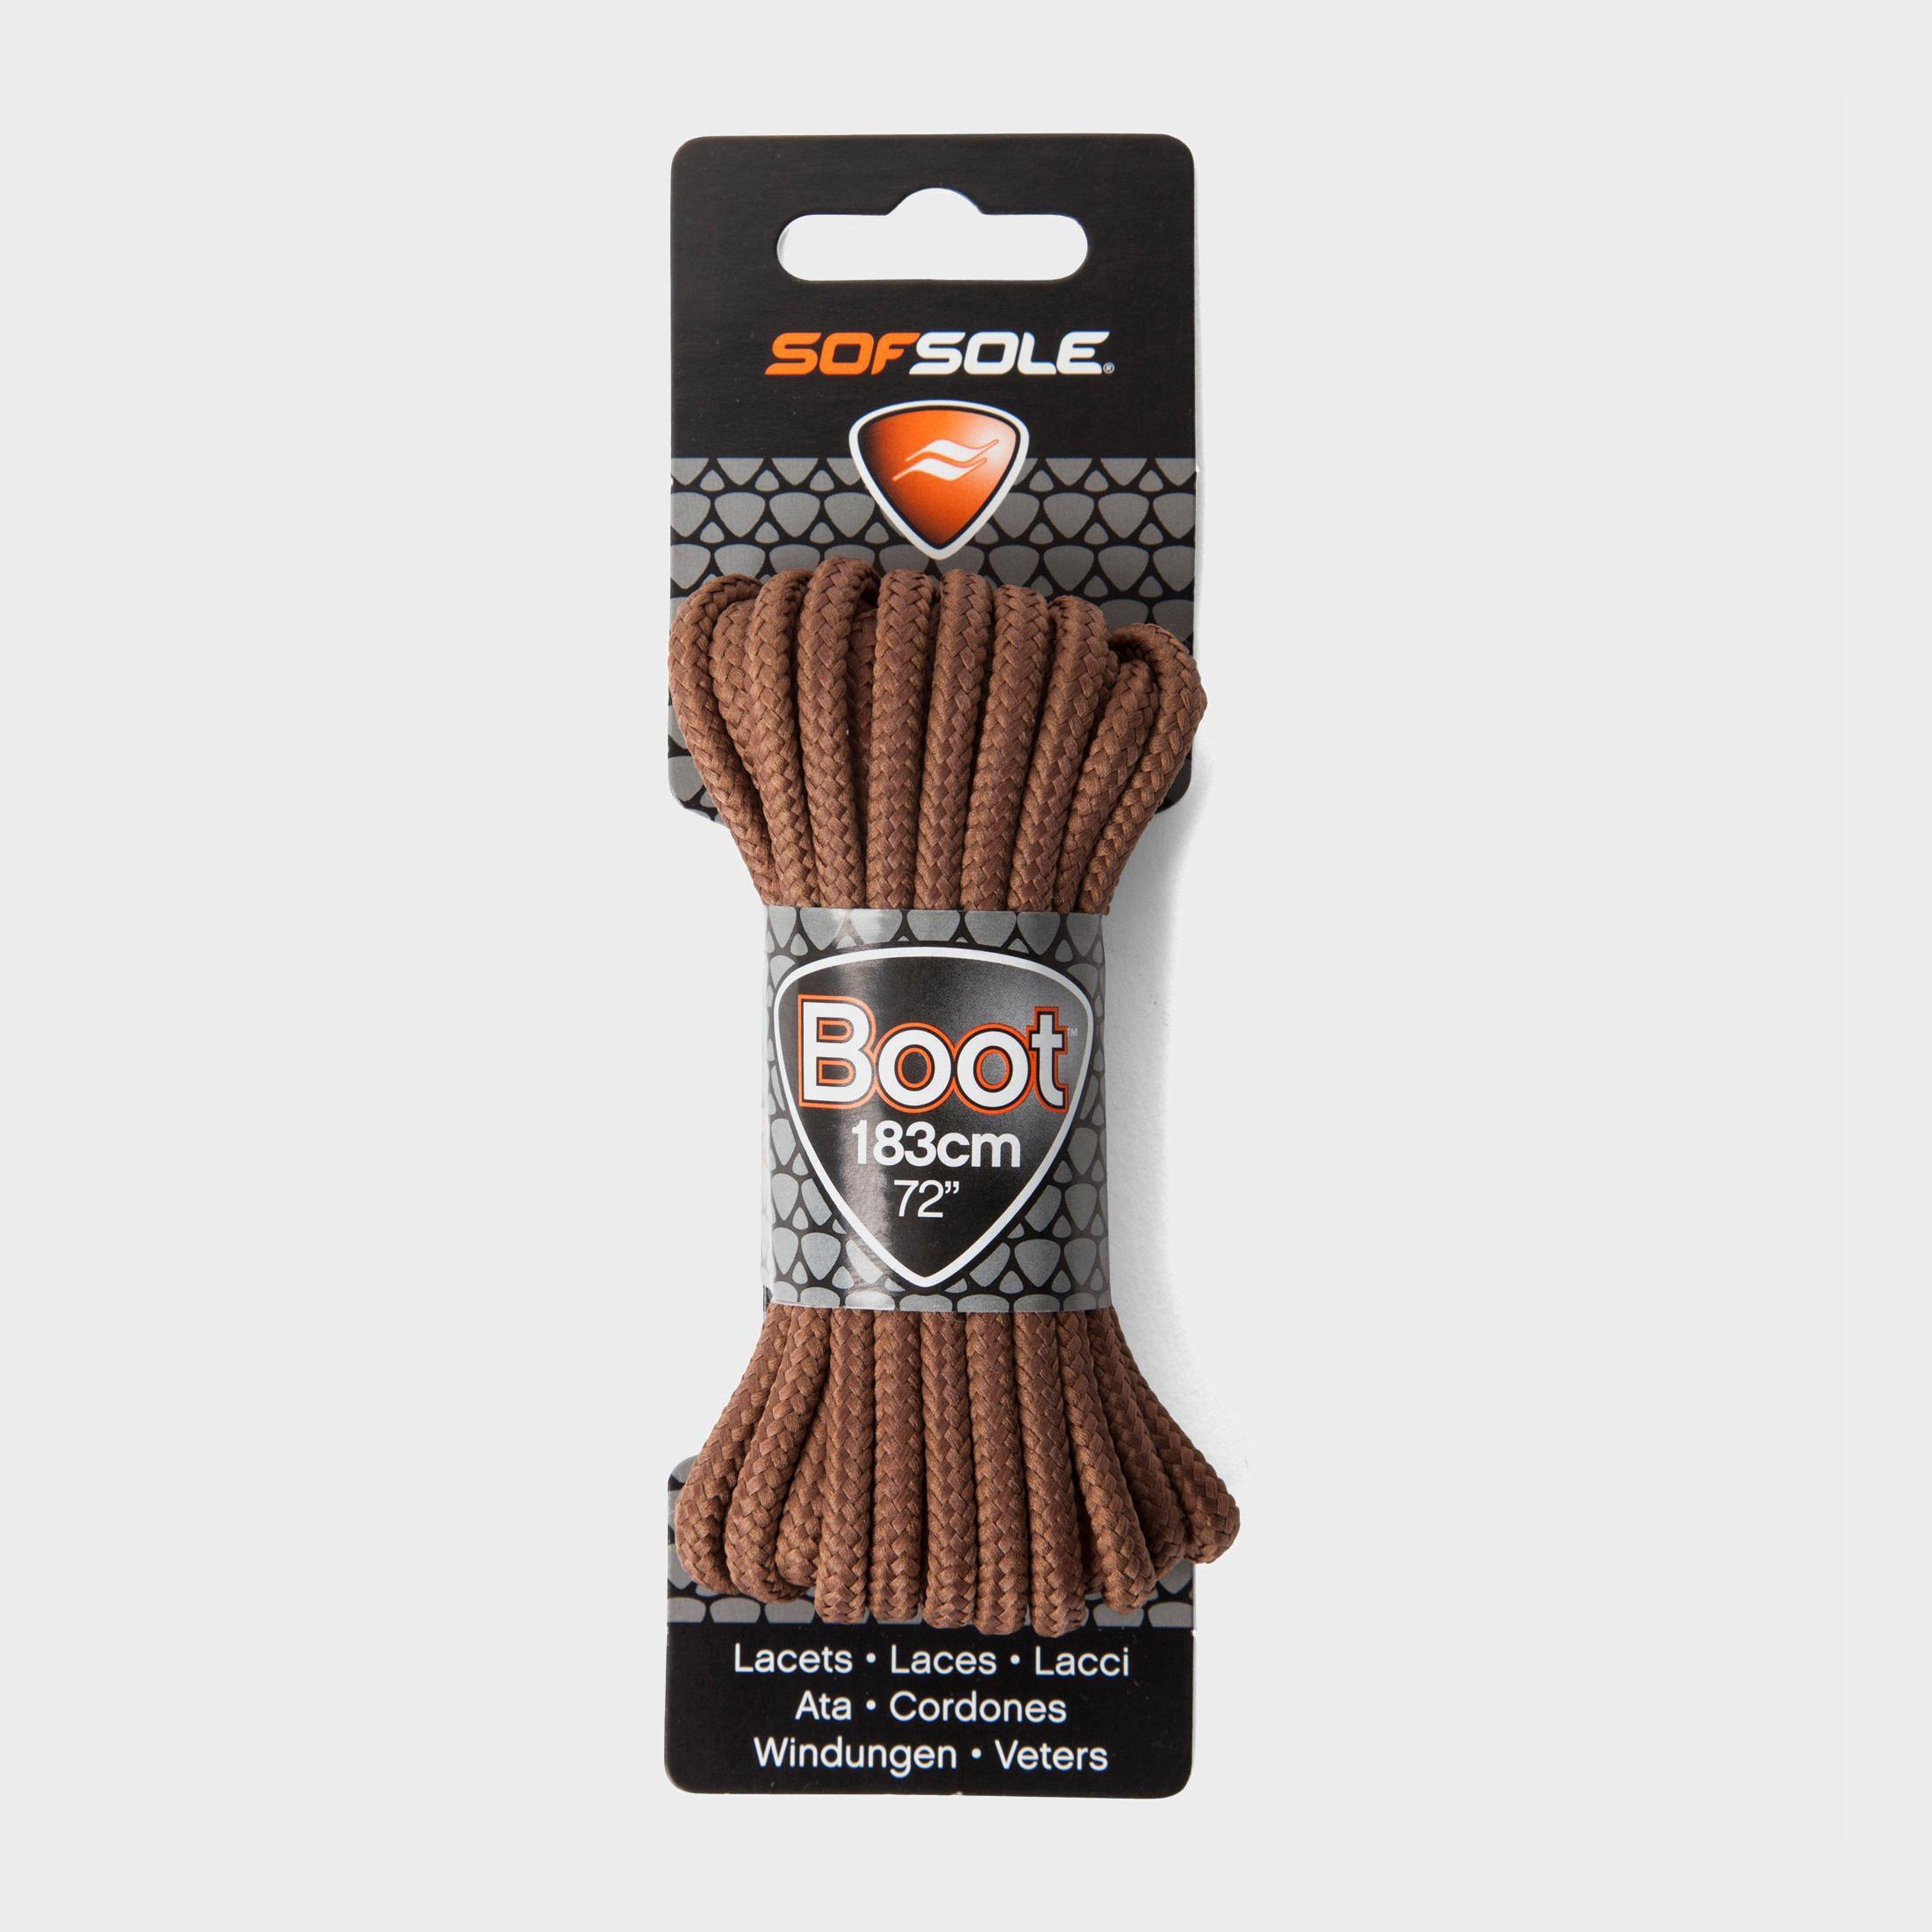 Sof Sole Wax Boot Laces - 183cm  Brown